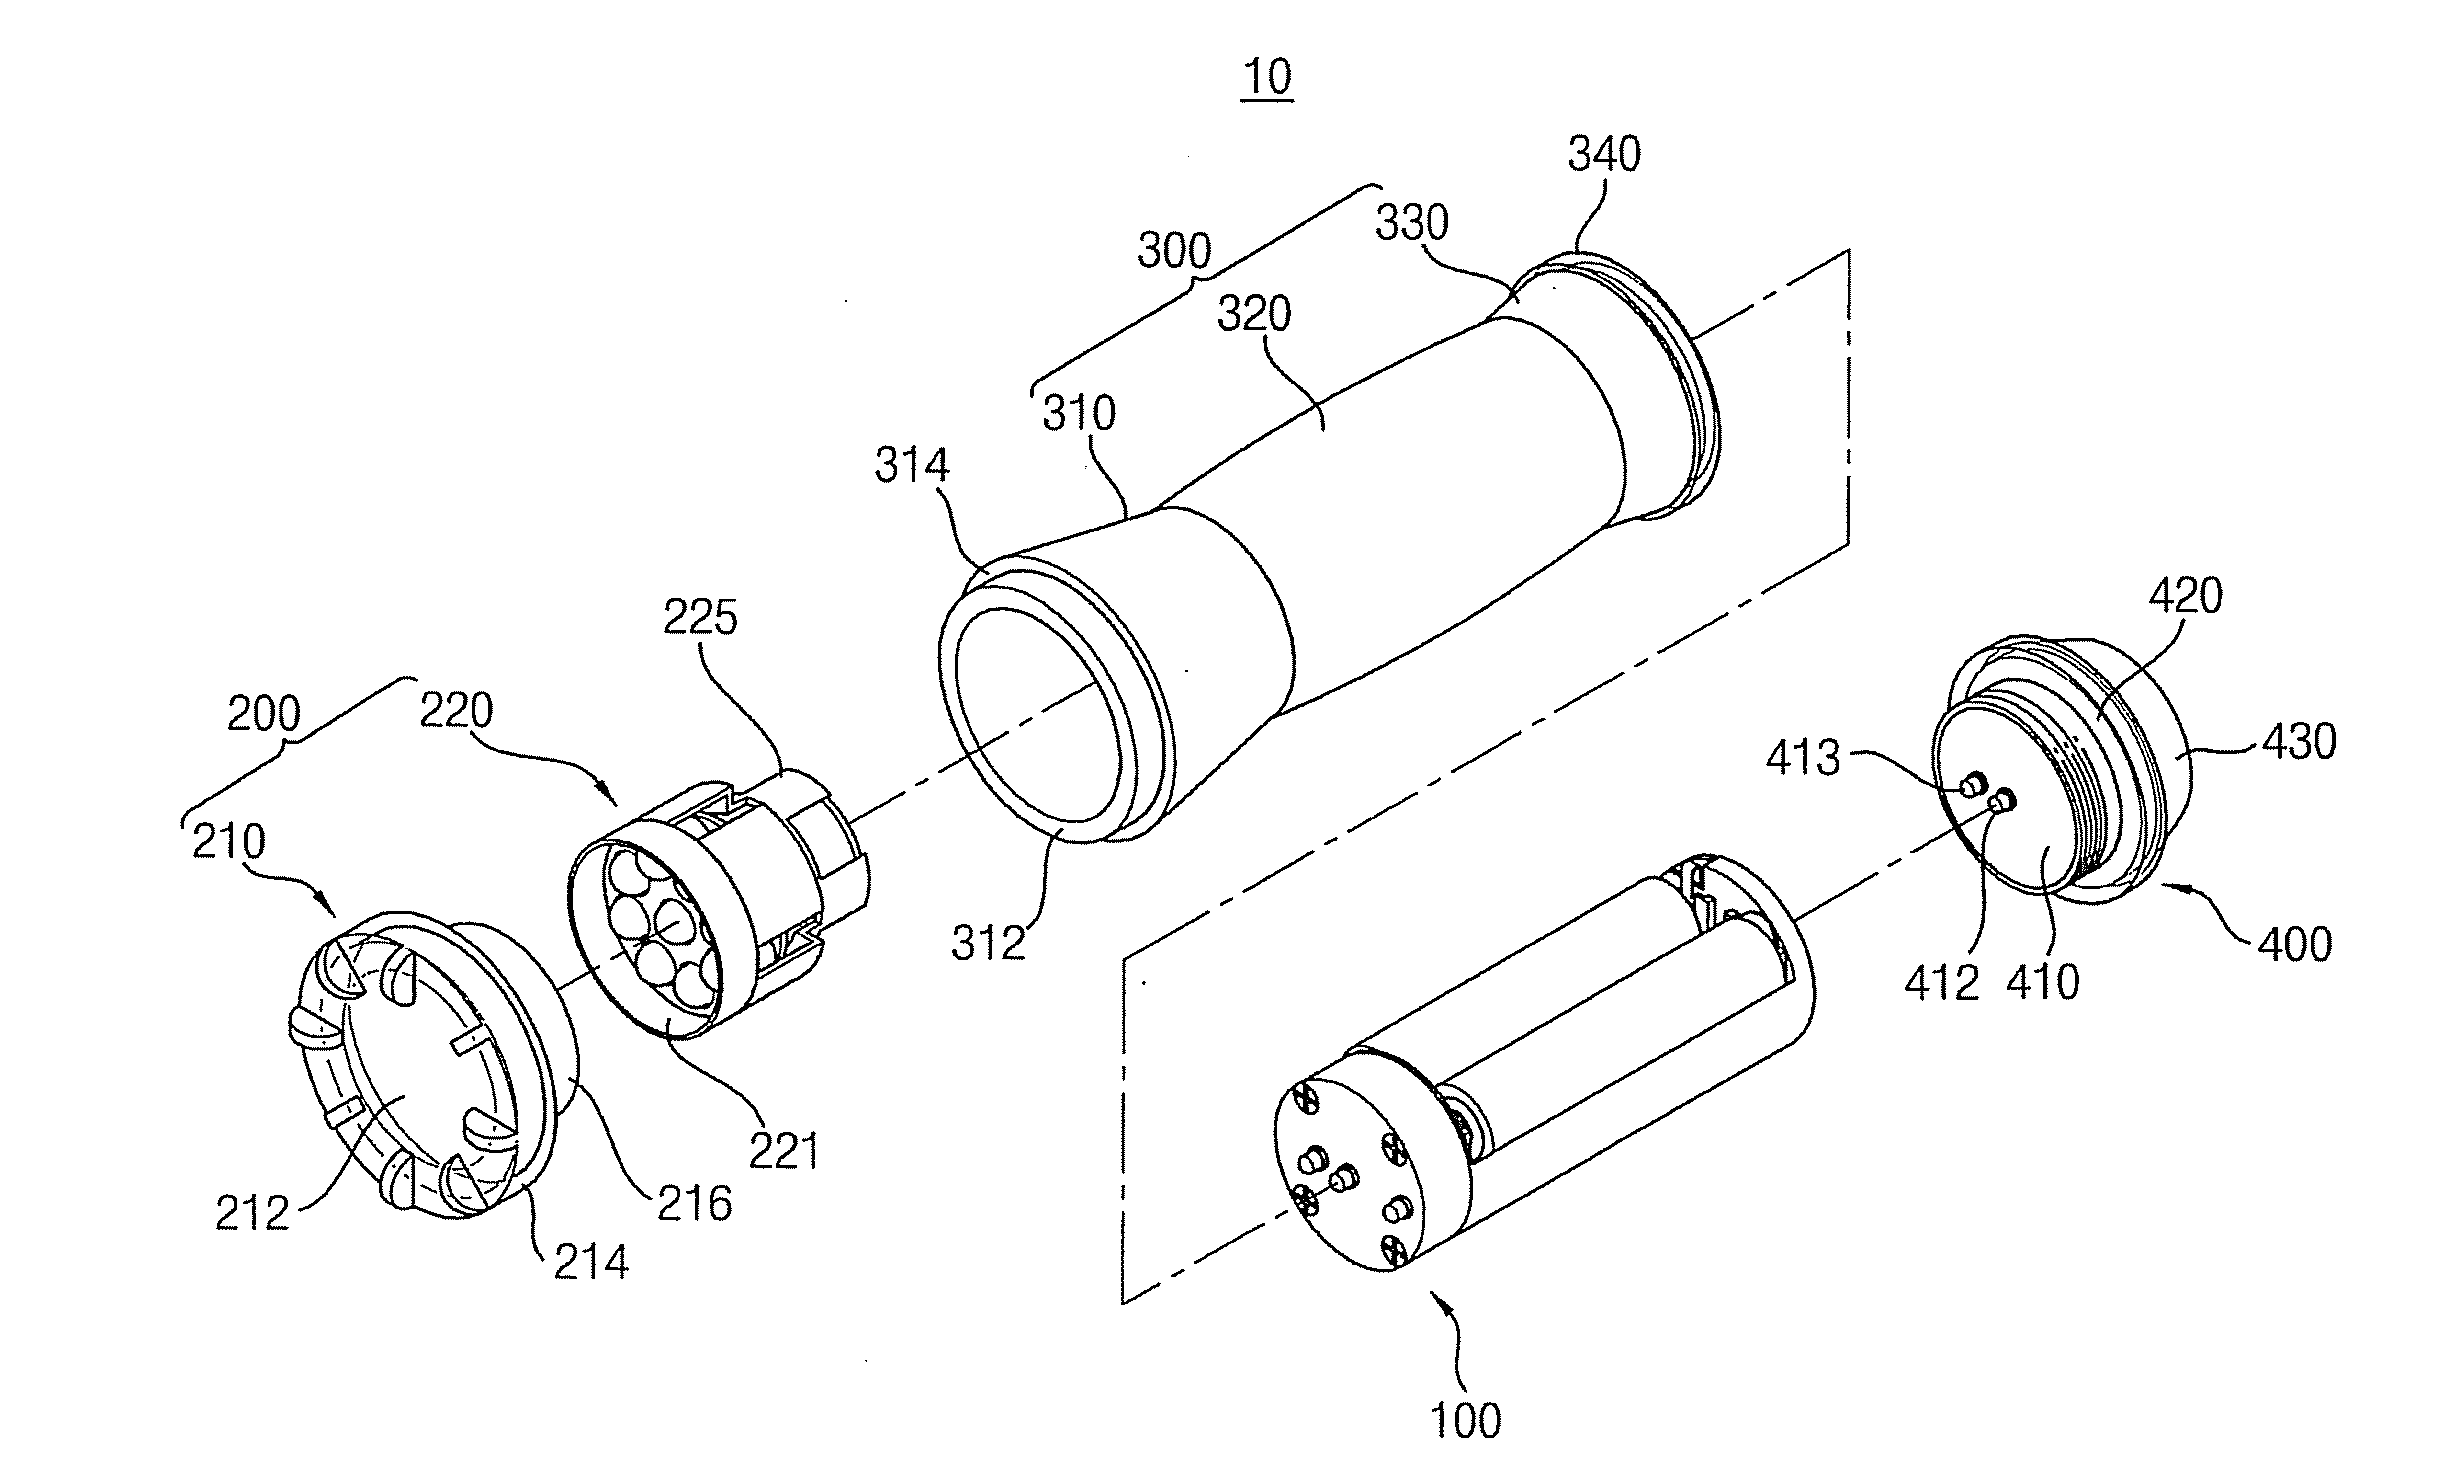 Dry cell holder and flashlight having the same